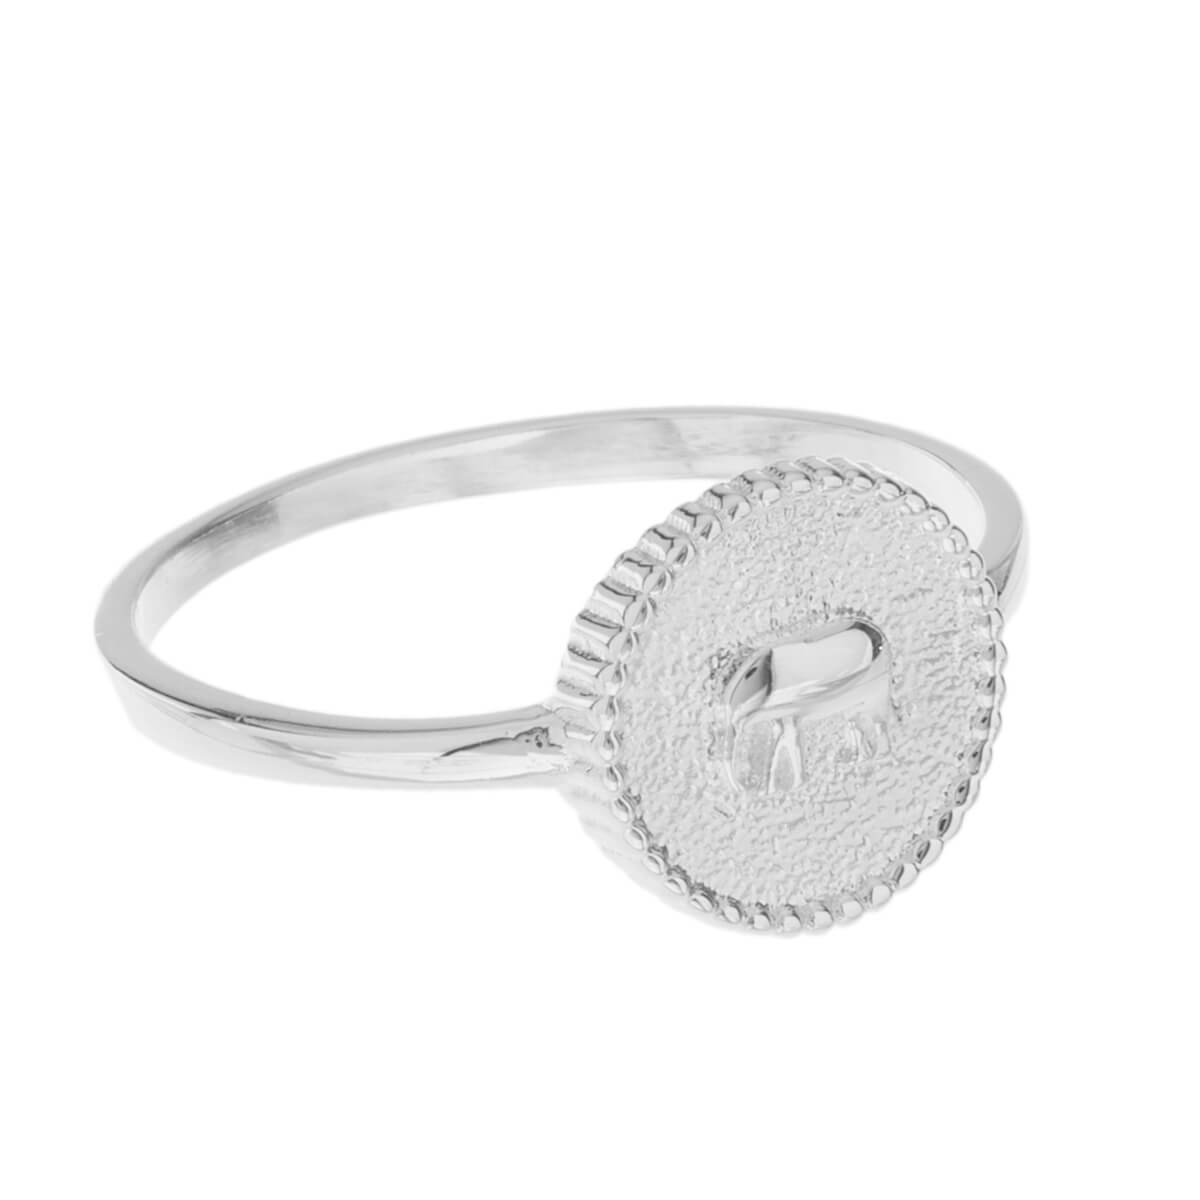 Elephant Sterling Silver Ring